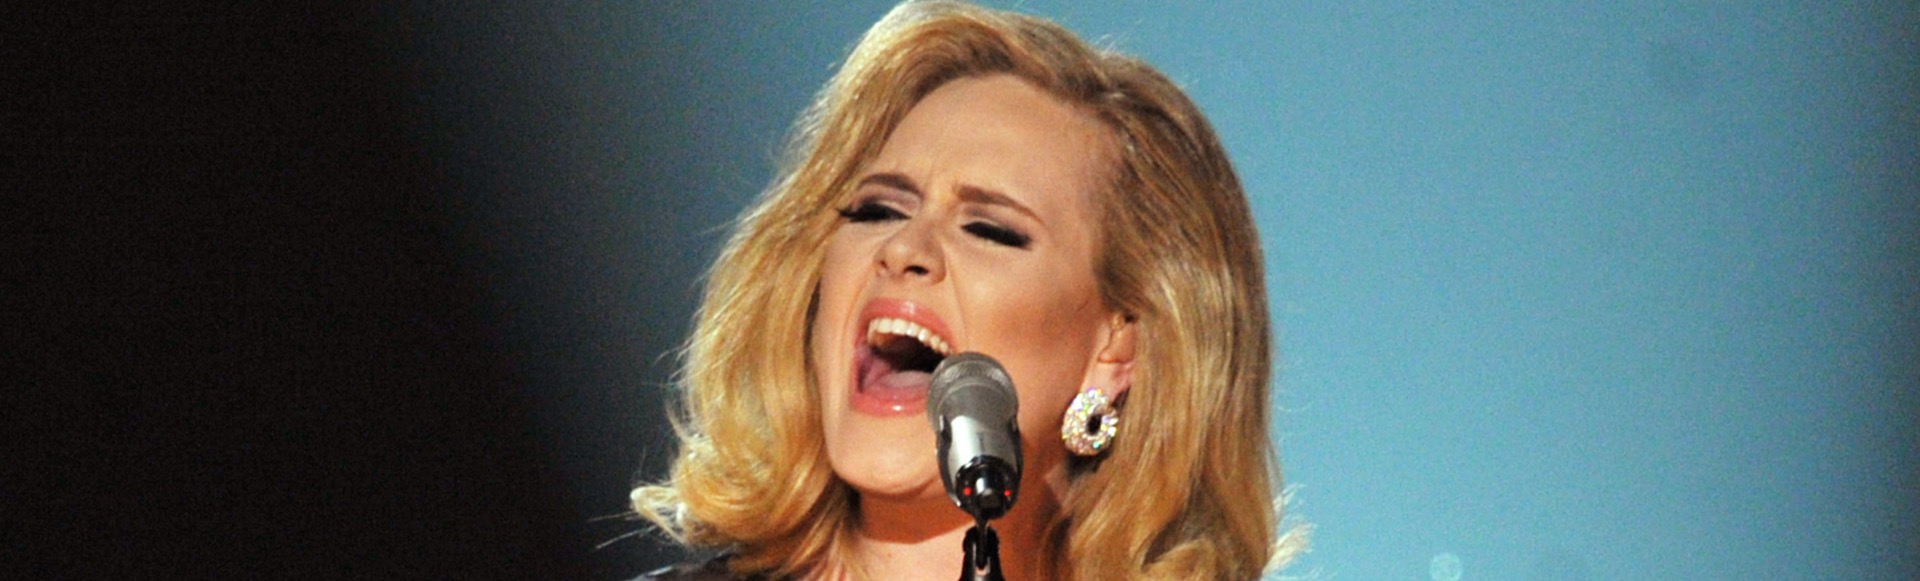 ADELE TRIBUTE SHOW performing by Hometown Glory